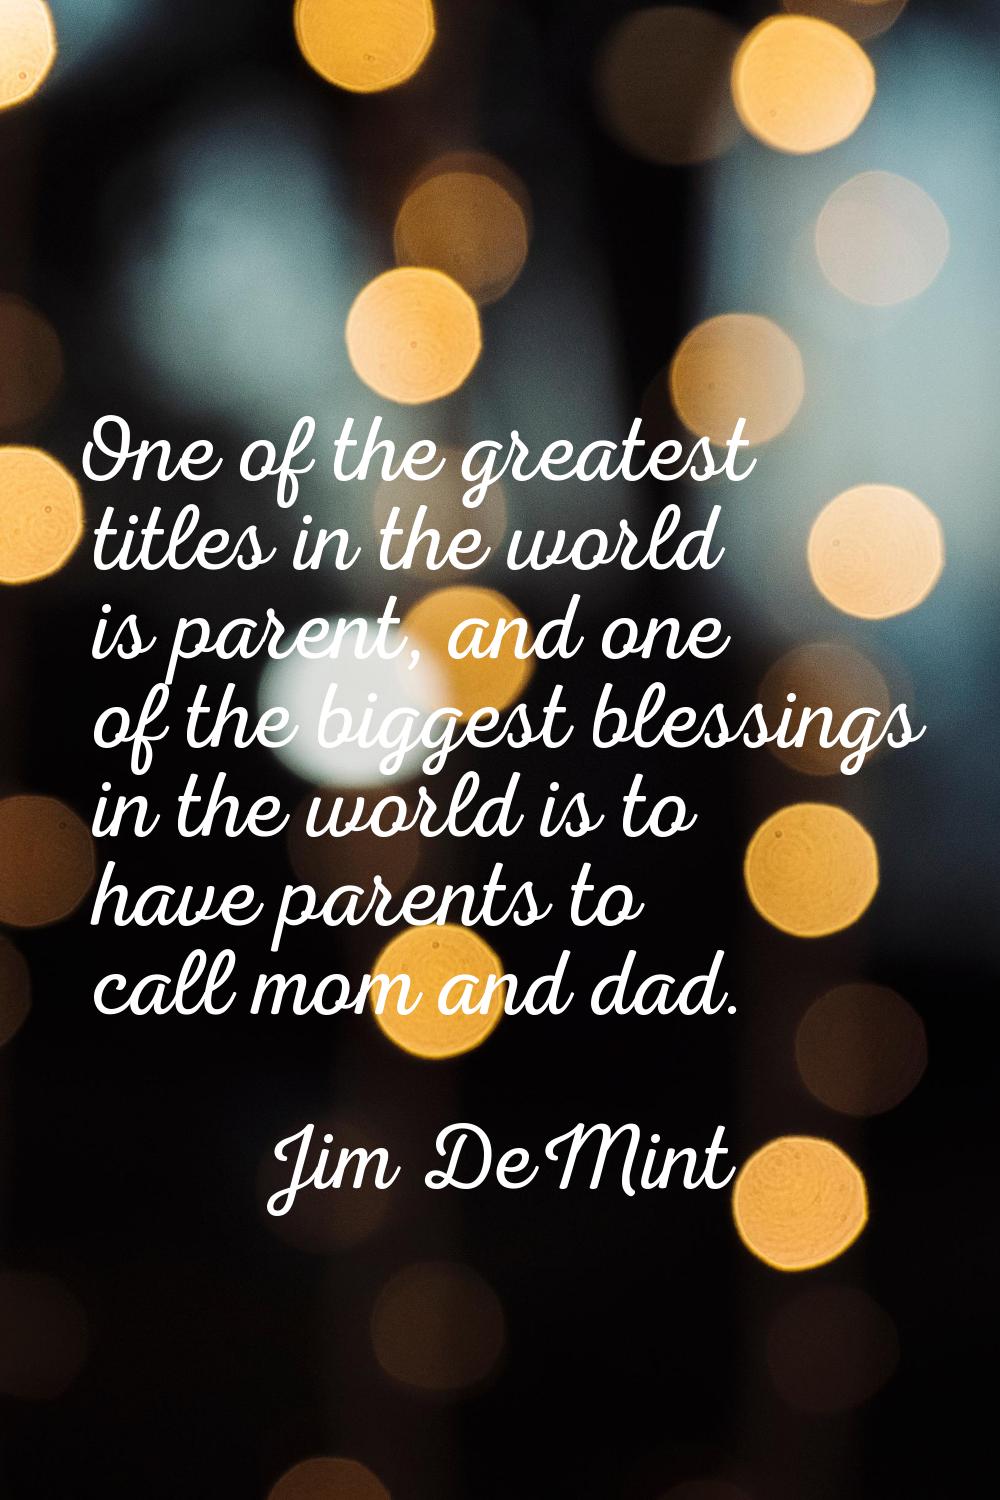 One of the greatest titles in the world is parent, and one of the biggest blessings in the world is